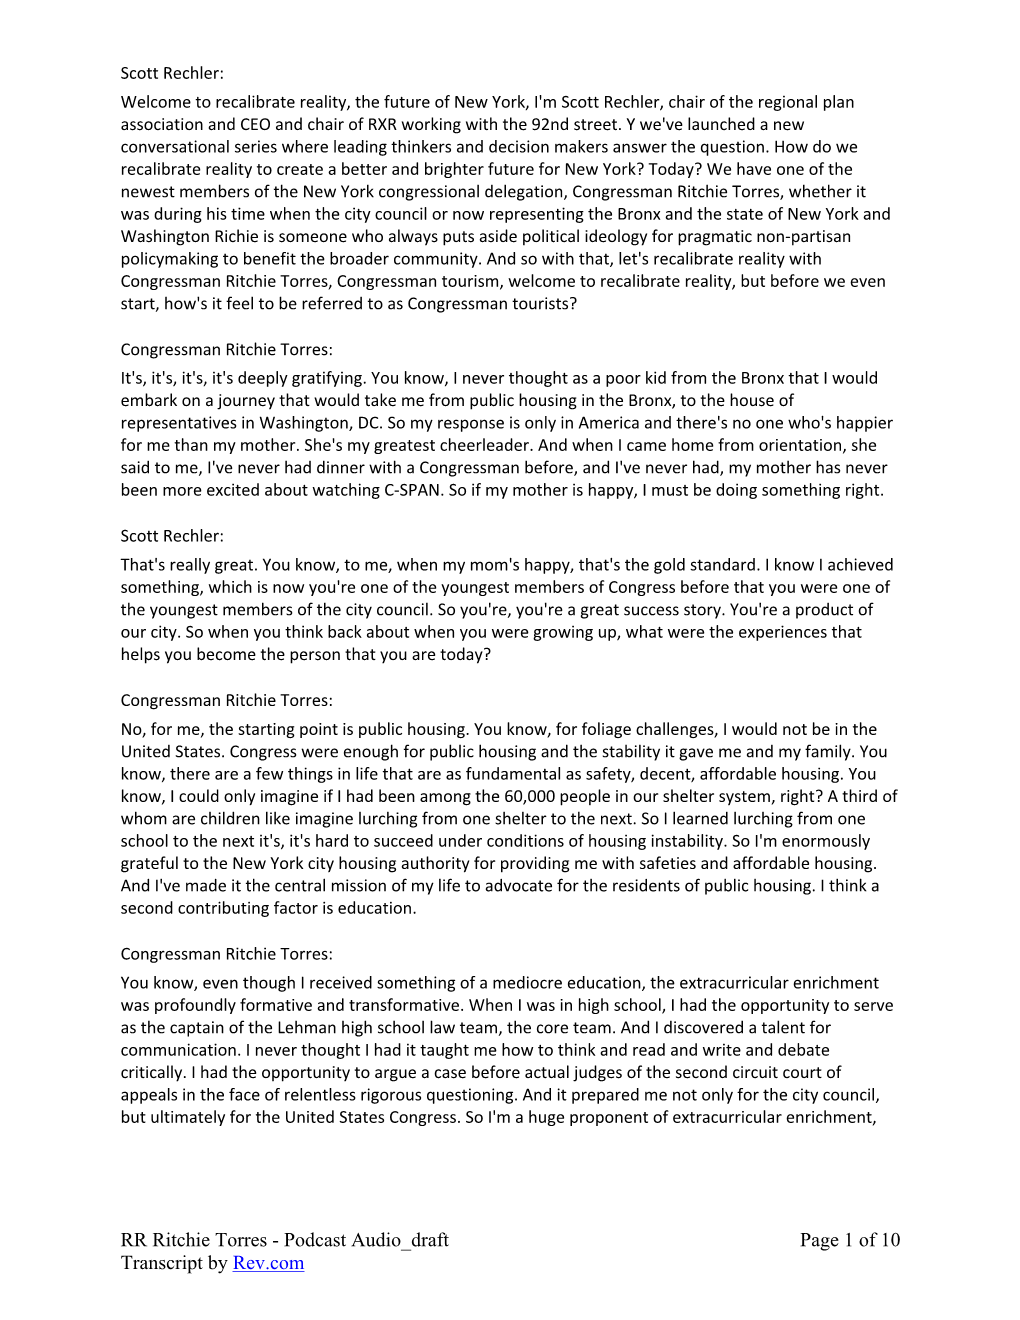 RR Ritchie Torres - Podcast Audio Draft Page 1 of 10 Transcript by Rev.Com This Transcript Was Exported on Mar 26, 2021 - View Latest Version Here